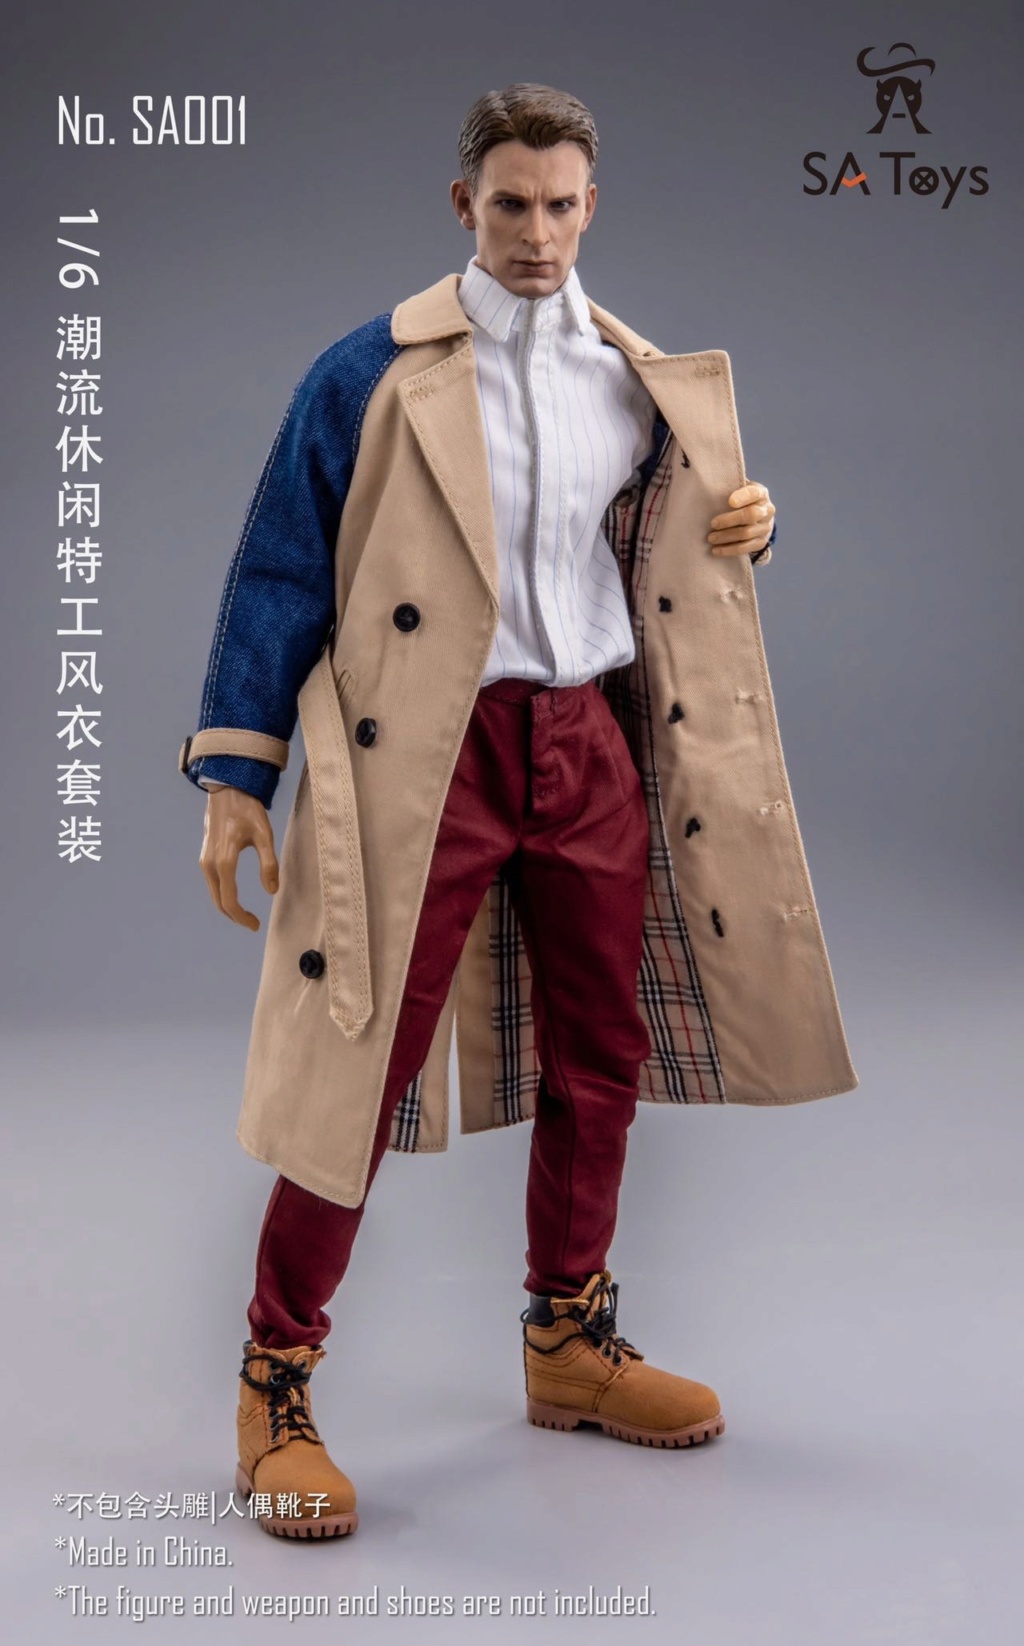 NEW PRODUCT: SA Toys: 1/6 Trend Casual Agent Trench coat set (SA001) 15314111